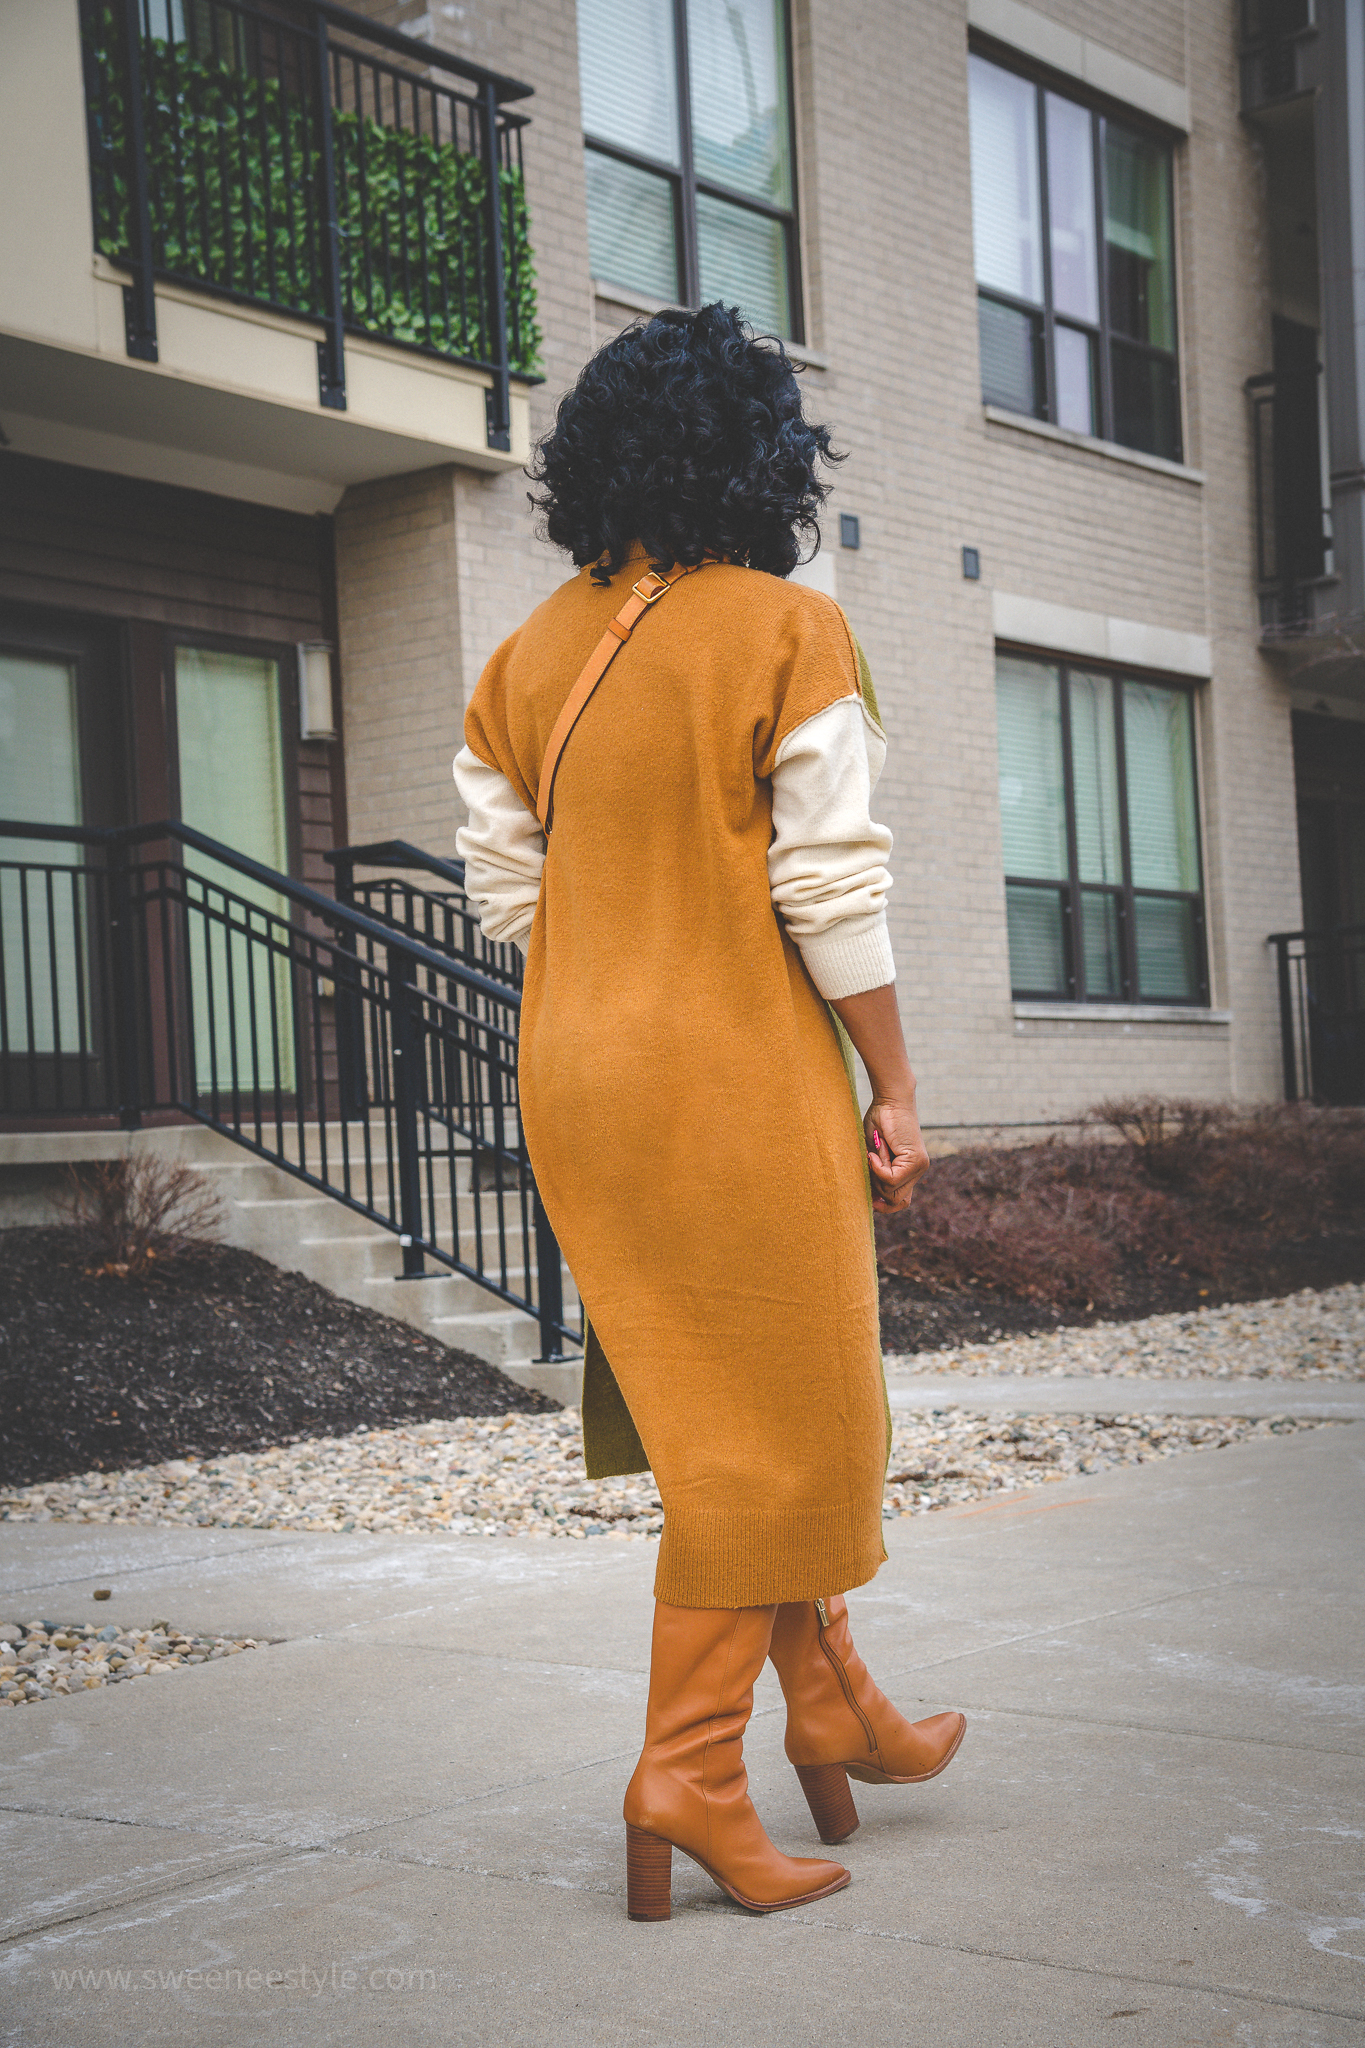 SWEENEE STYLE, EASY OUTFIT IDEAS, HOW TO WEAR KNEE BOOTS, HOW TO WEAR A FLEXI ROD SET, BLACK GIRLS WHO BLOG, STYLE INSPO